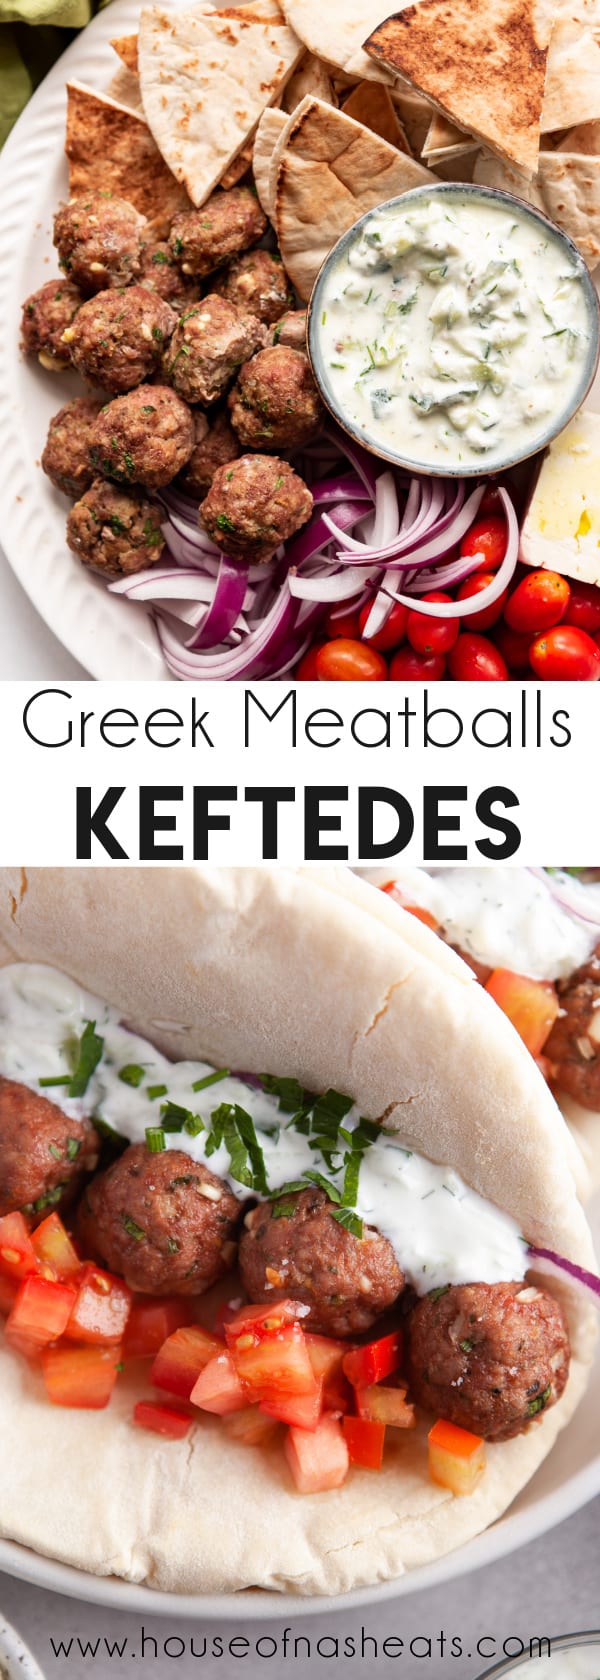 A collage of images of Greek meatballs with text overlay.